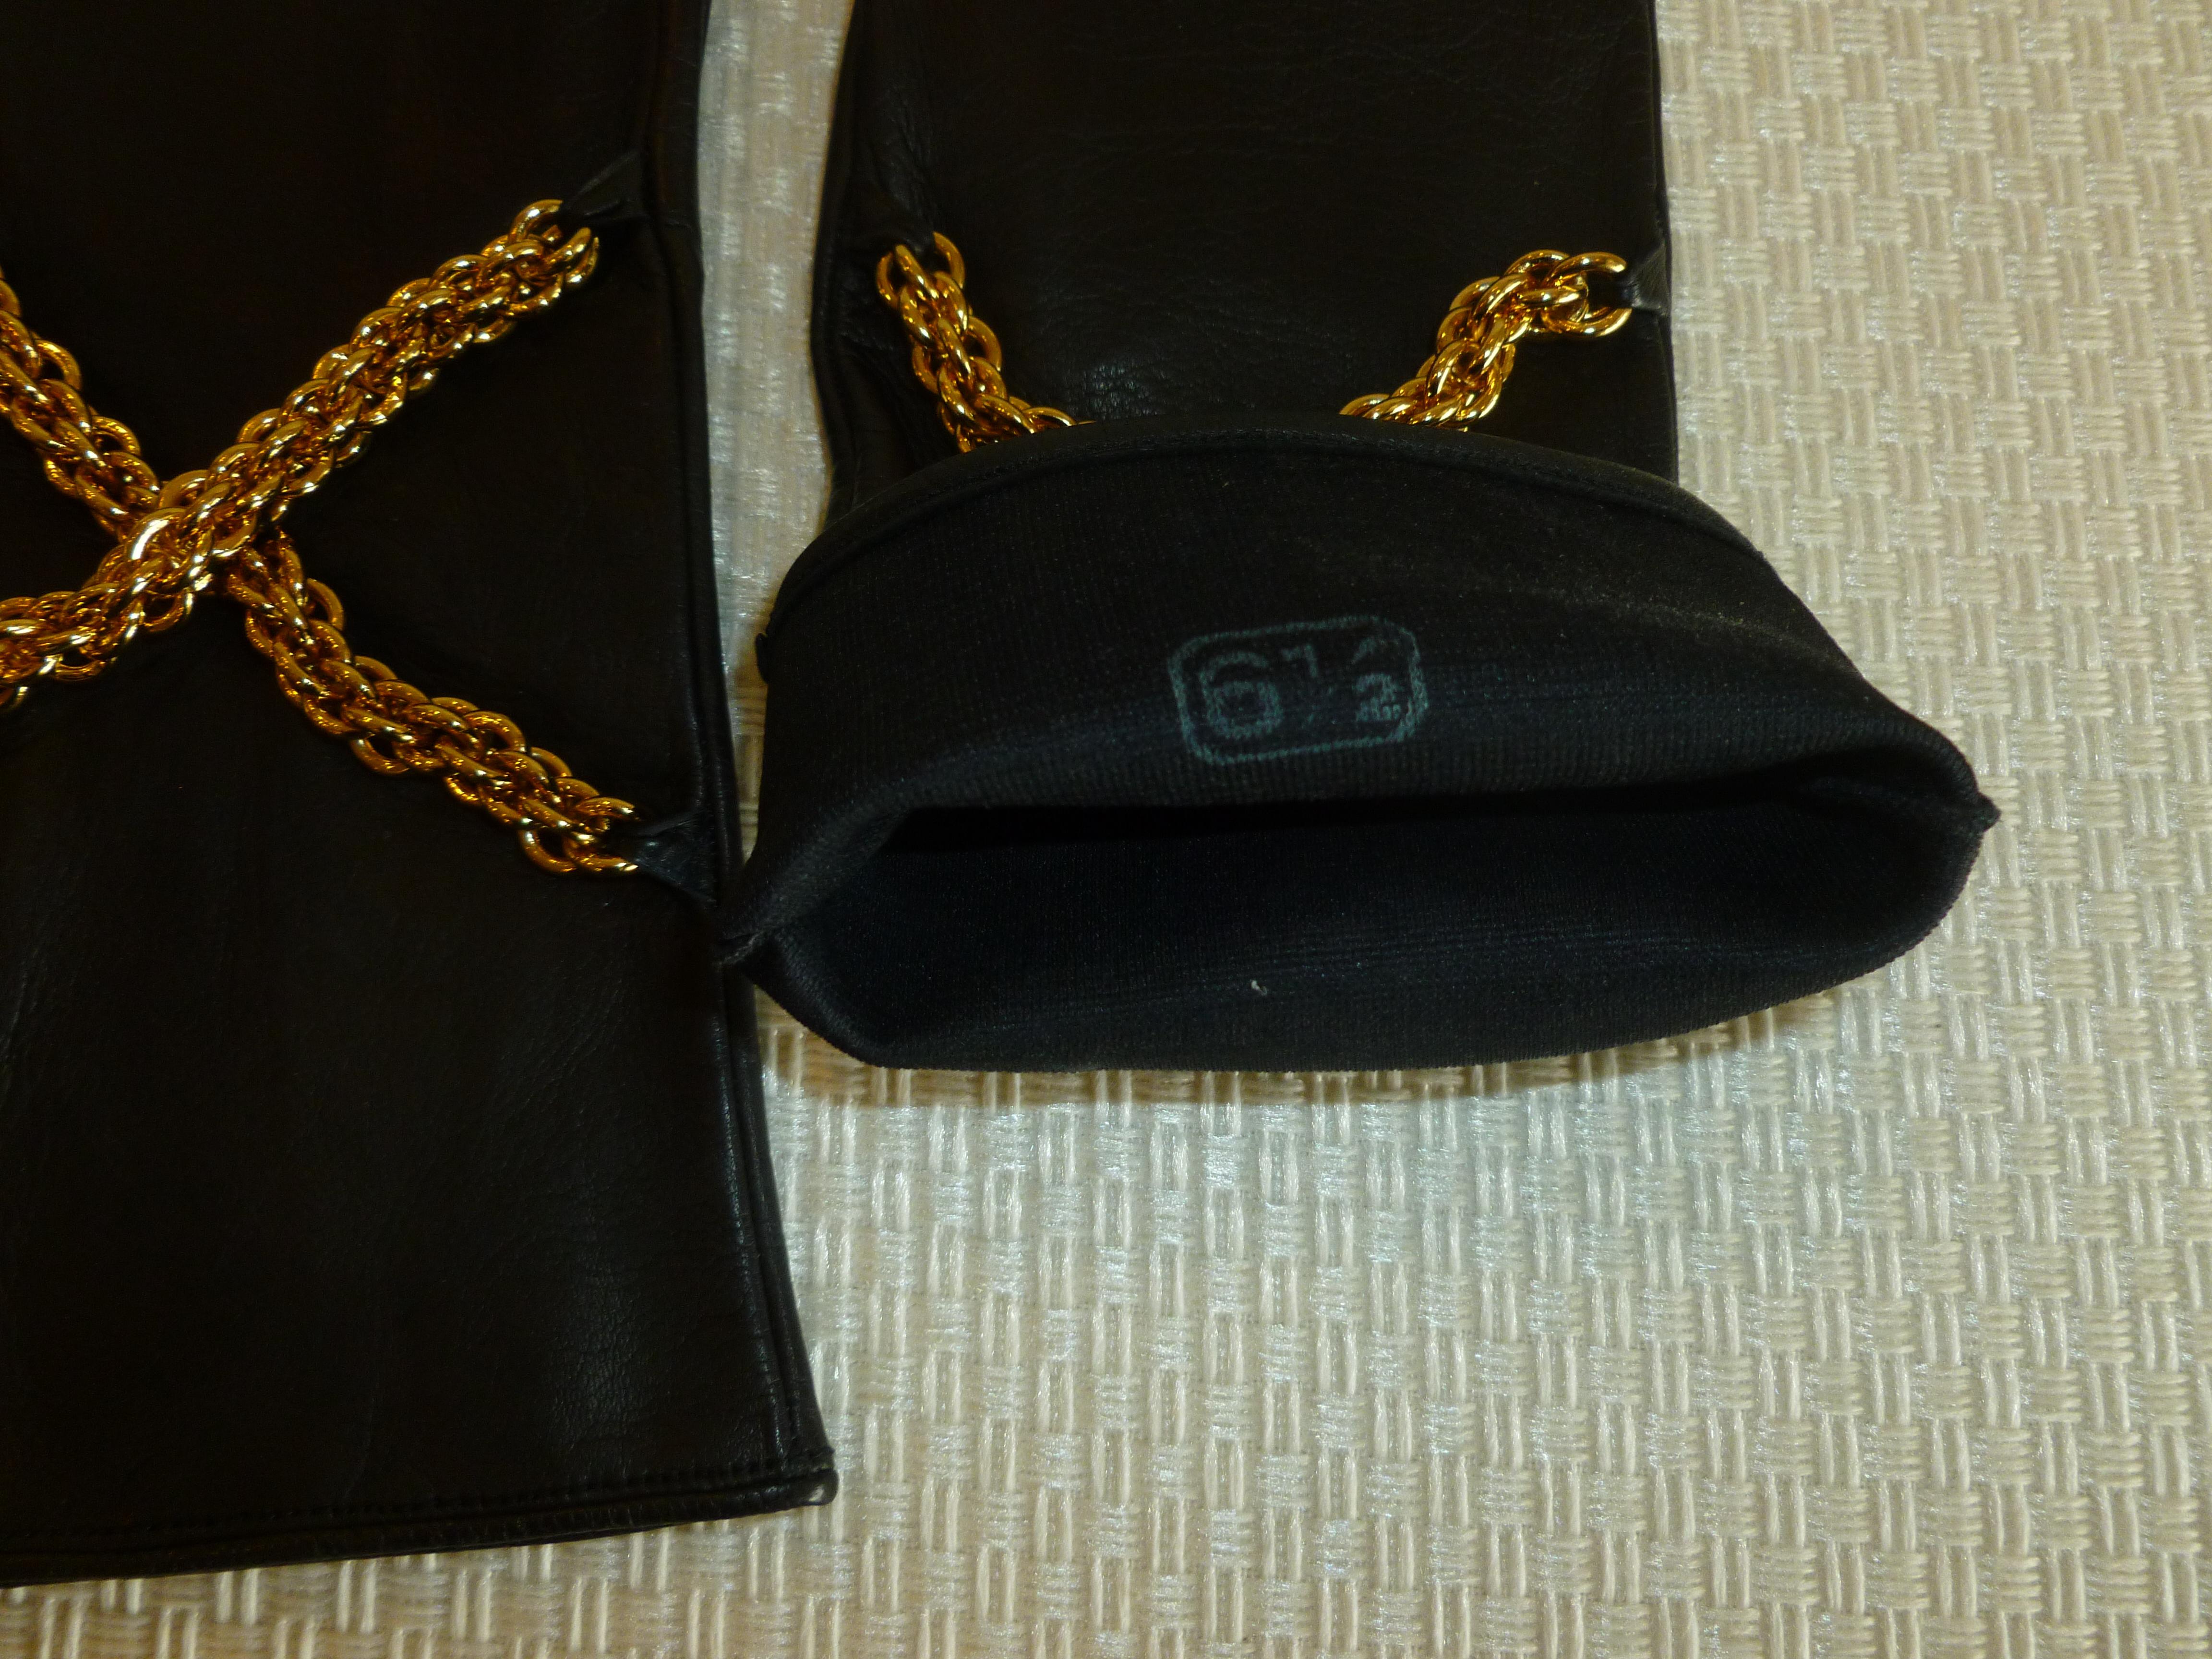  Paloma Picasso Back Leather and Brass Chain Gloves Pair Of 14